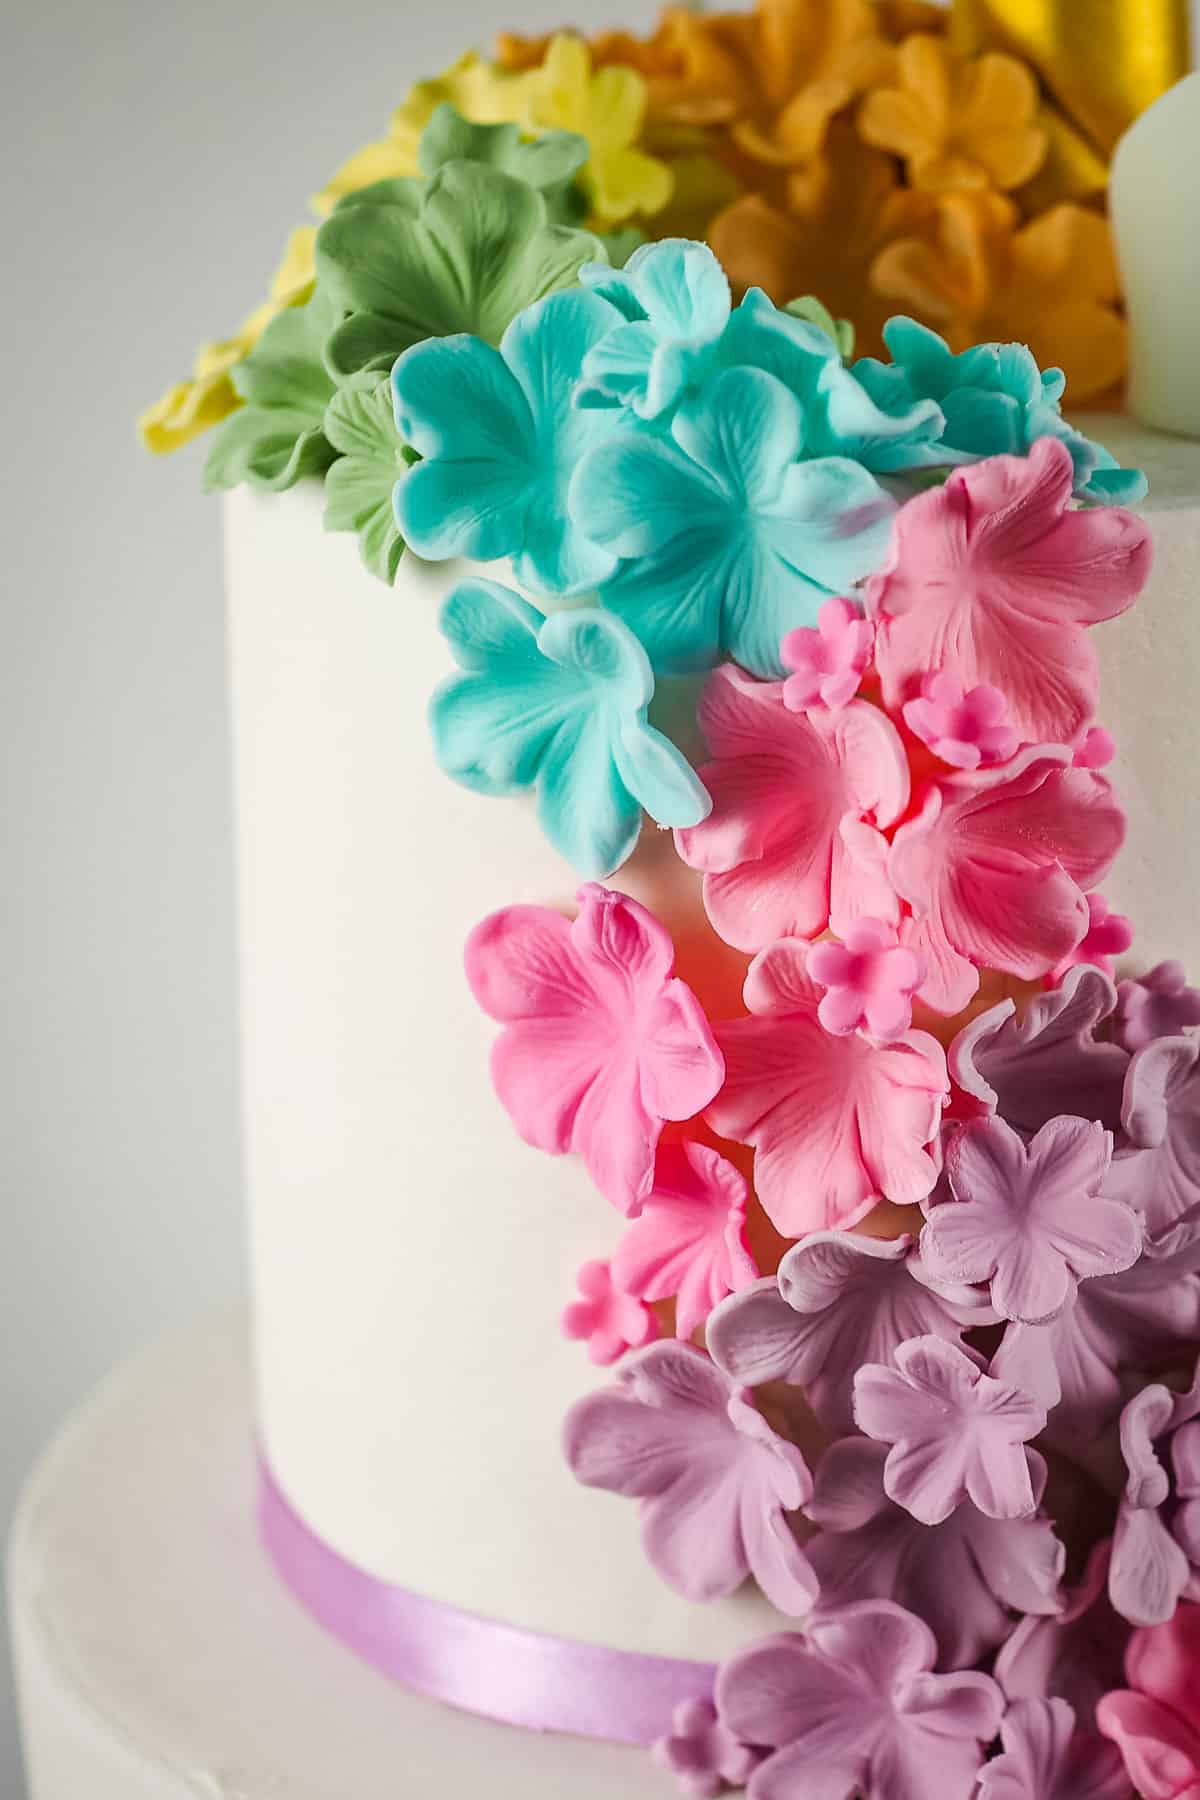 Colorful sugar flowers on a cake